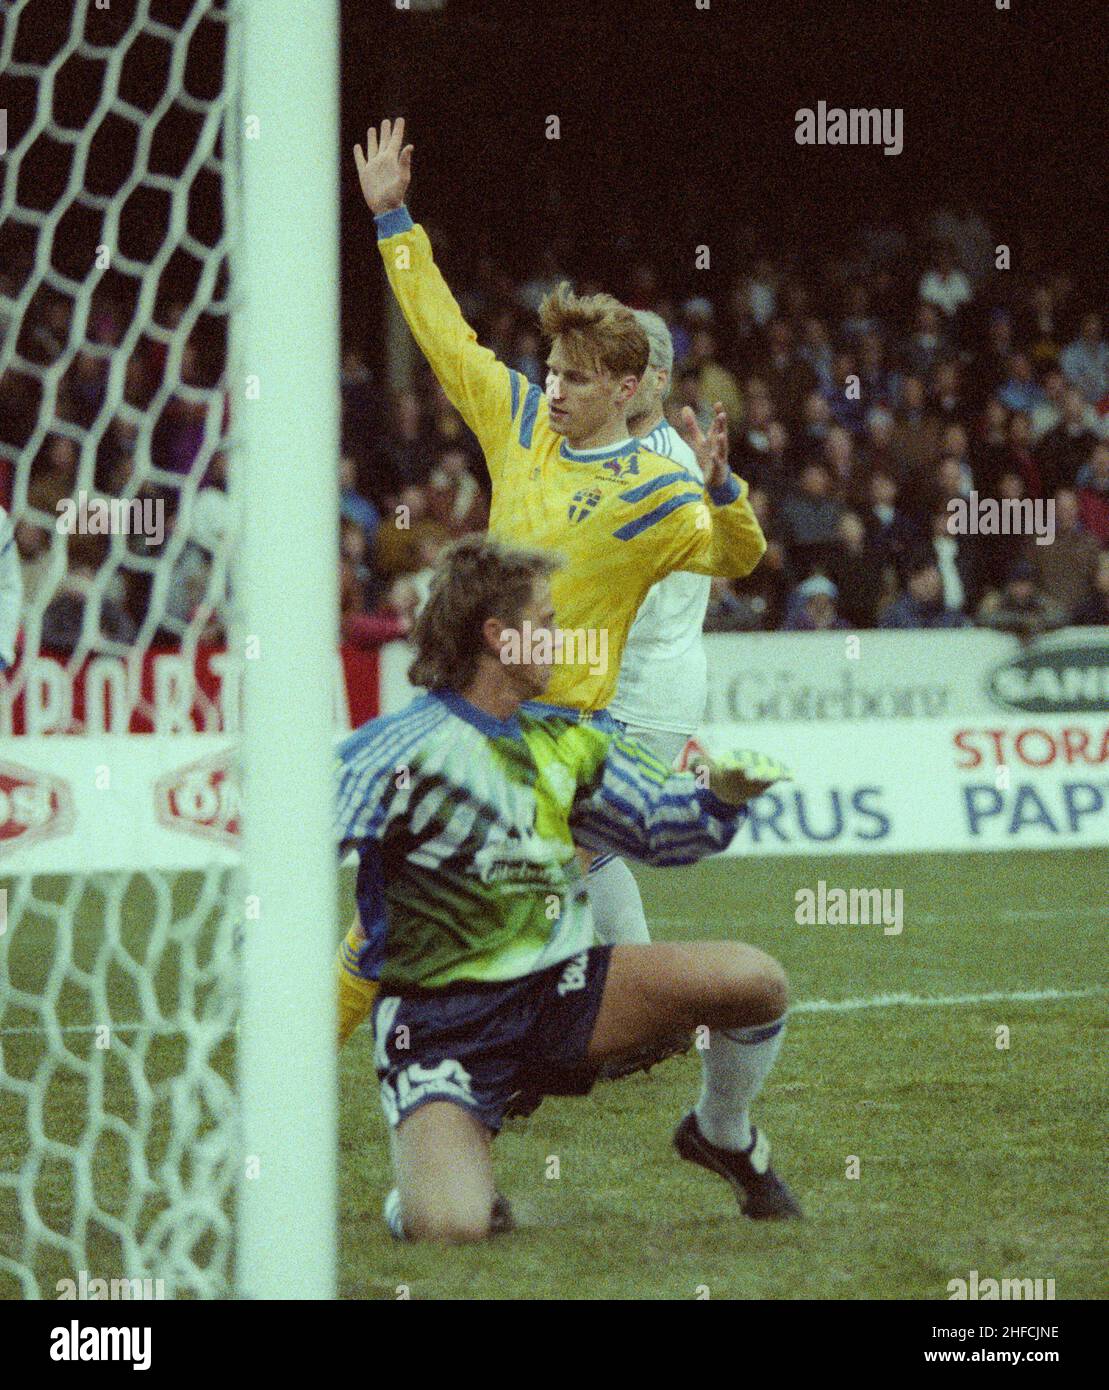 KENNET ANDERSSON football player in Swedish National team and professional in Belgium Mechelem during European Championship in Sweden 1992.Scores on Sören Bjärelöv  in a friendly game against the Gothenburg town team before the championship Stock Photo